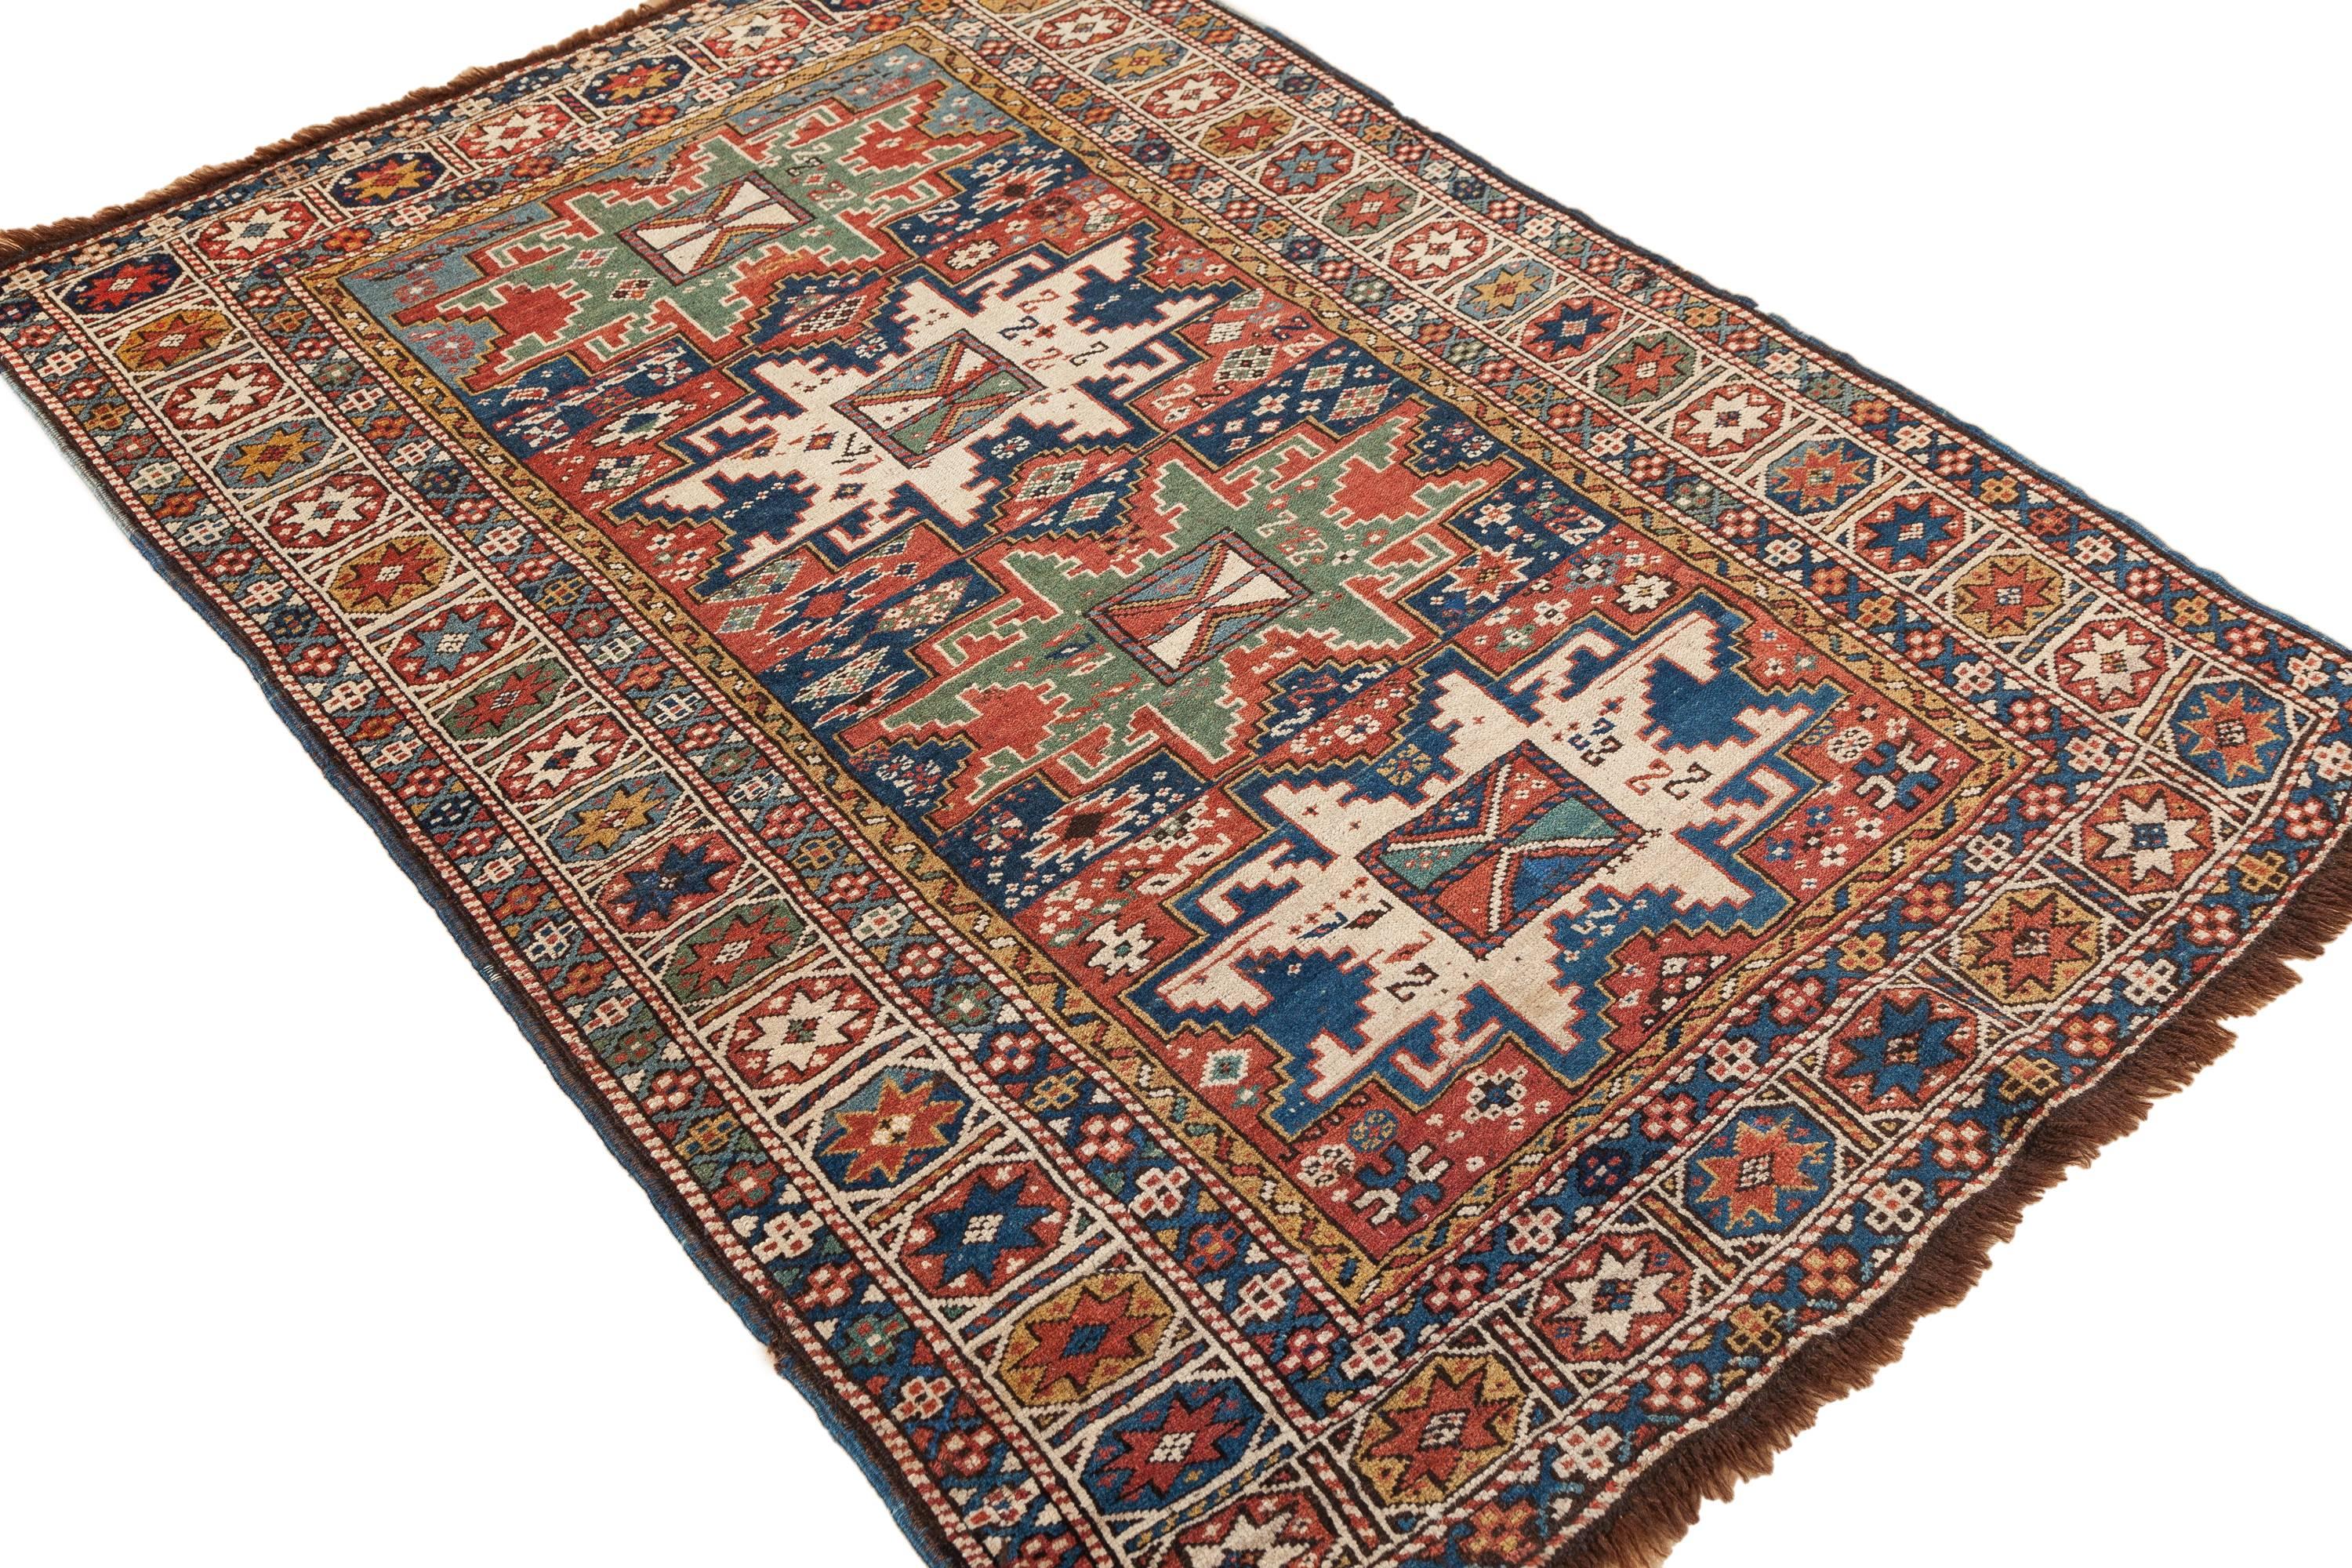 A Lesghi rug from the Caucasus, dating to the late 19th century. A Classic Lesghi star design in fine condition.